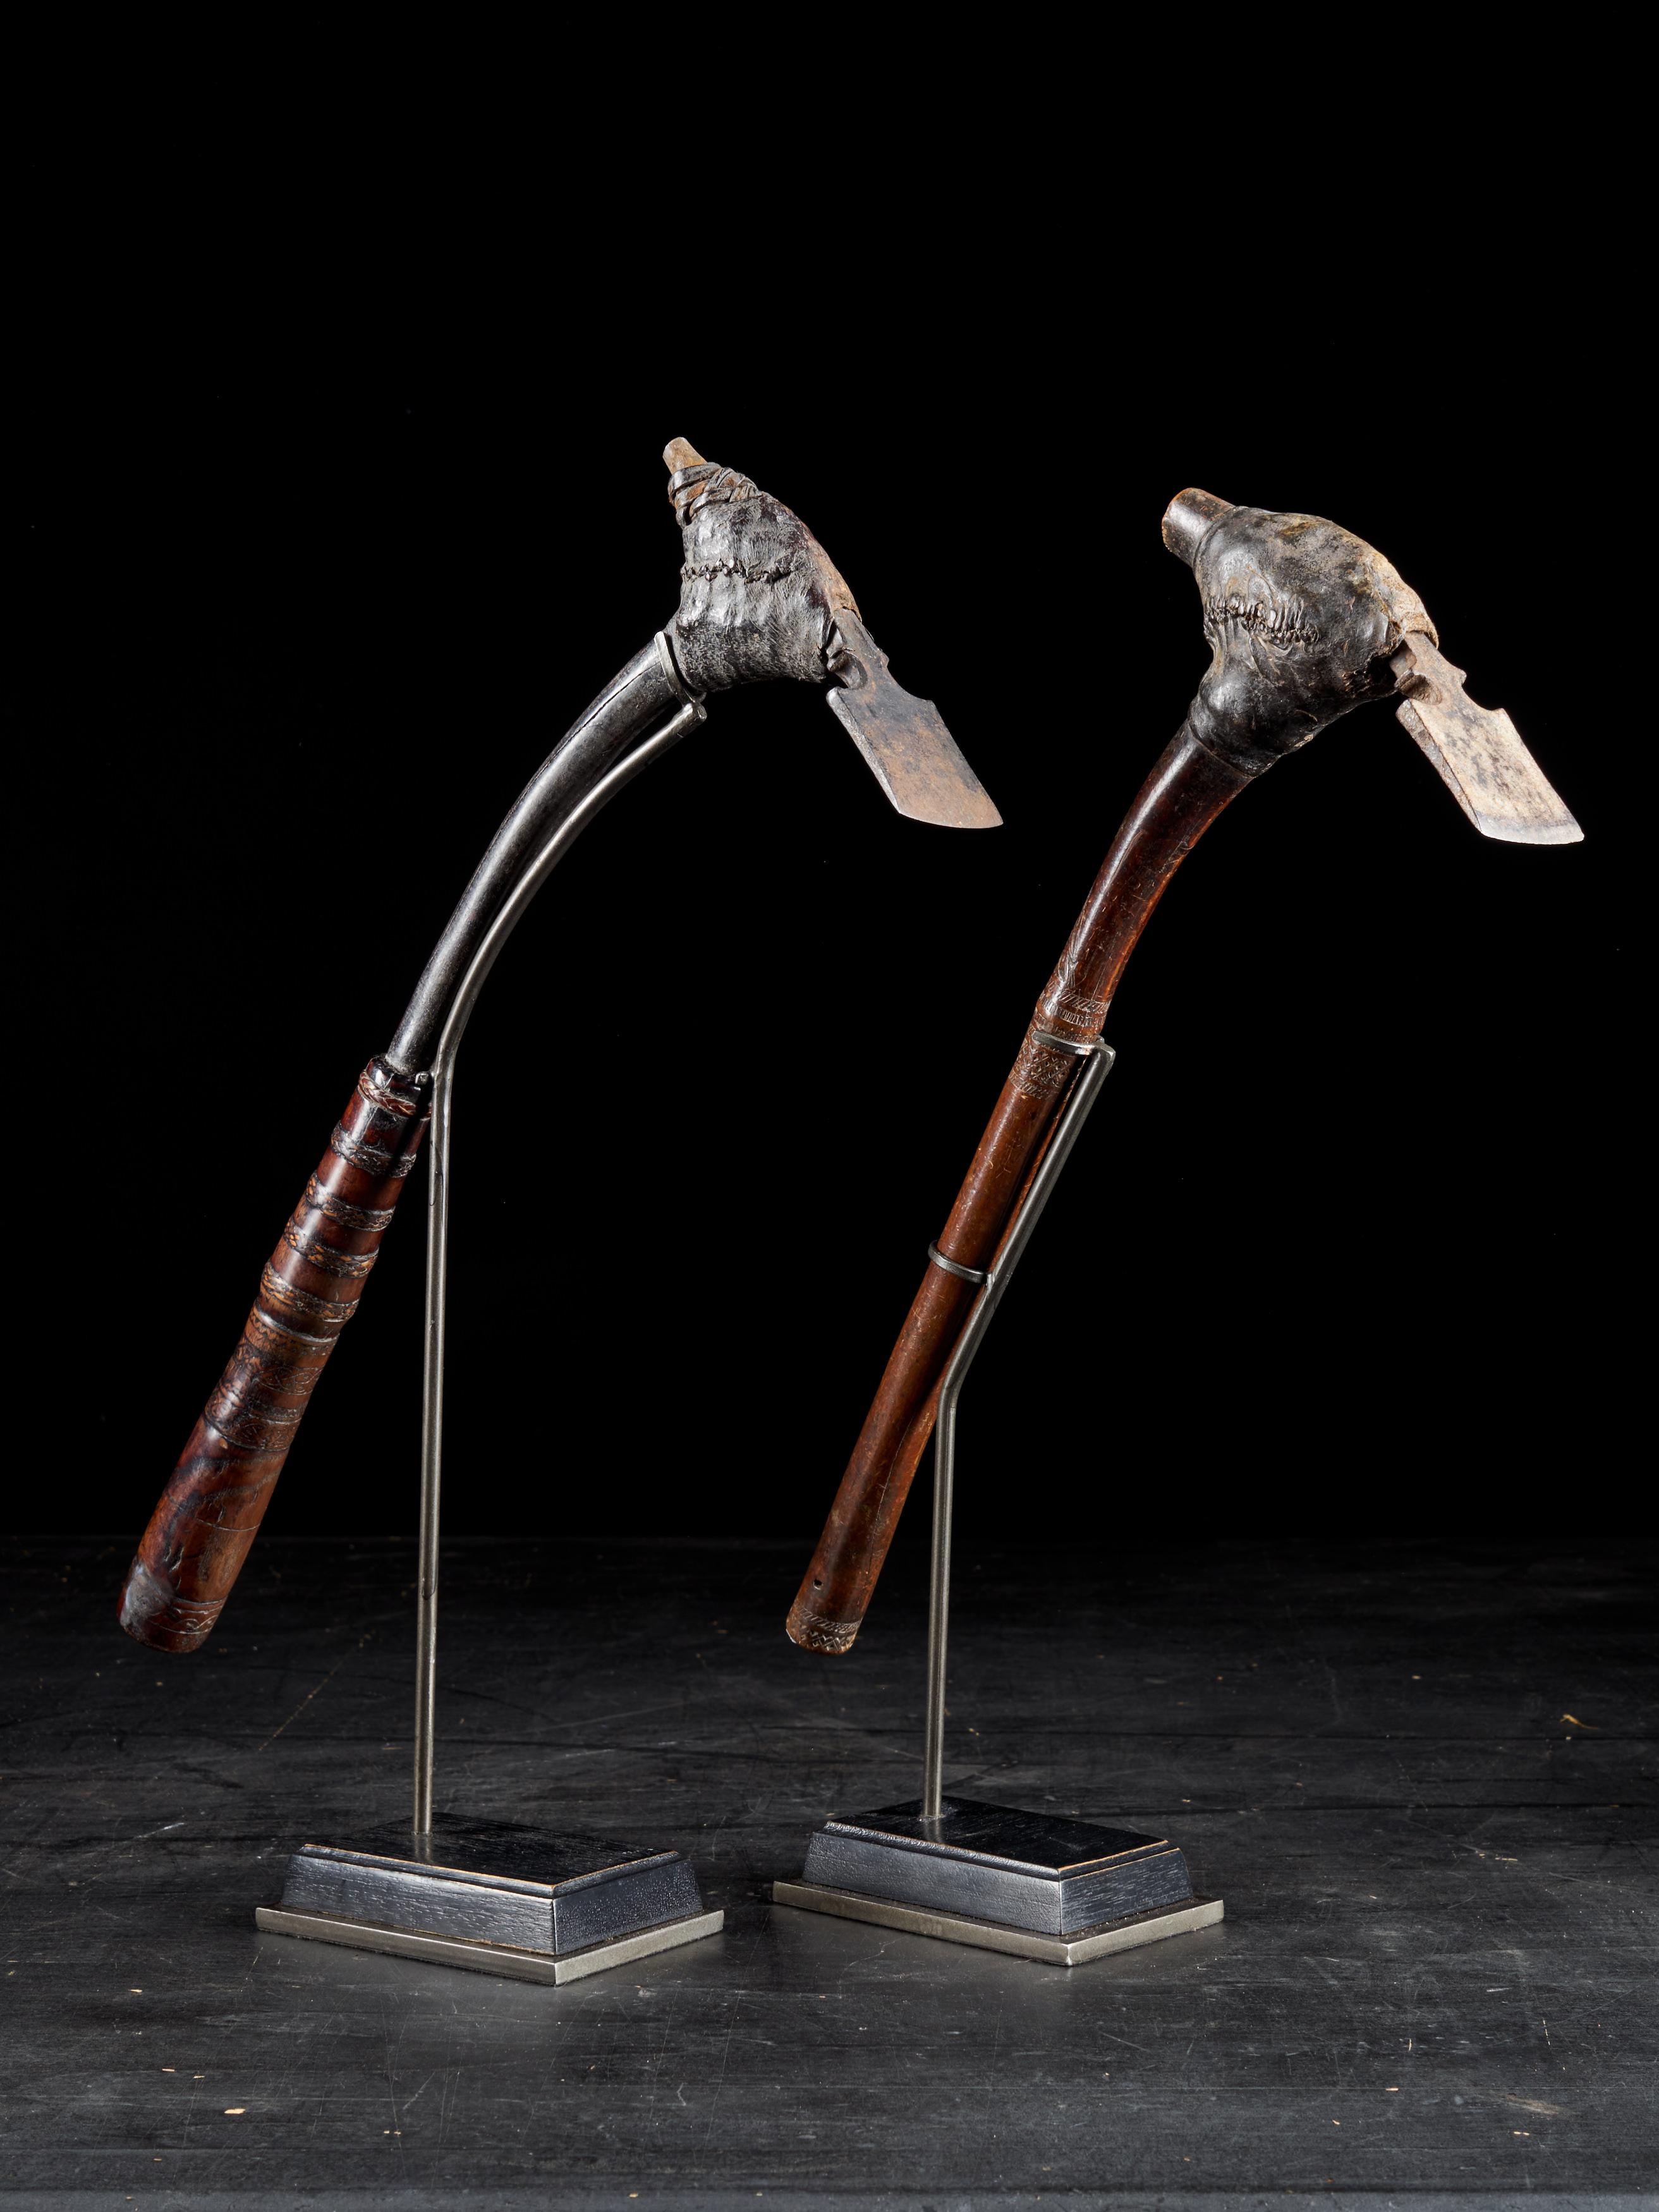 An adze is a cutting tool similar to an axe but with a cutting edge perpendicular to the handle rather than parallel. Toraja people from Sumatra Island, used for wood carving, were made from nephrite (also known as jade) in the South Island. In the